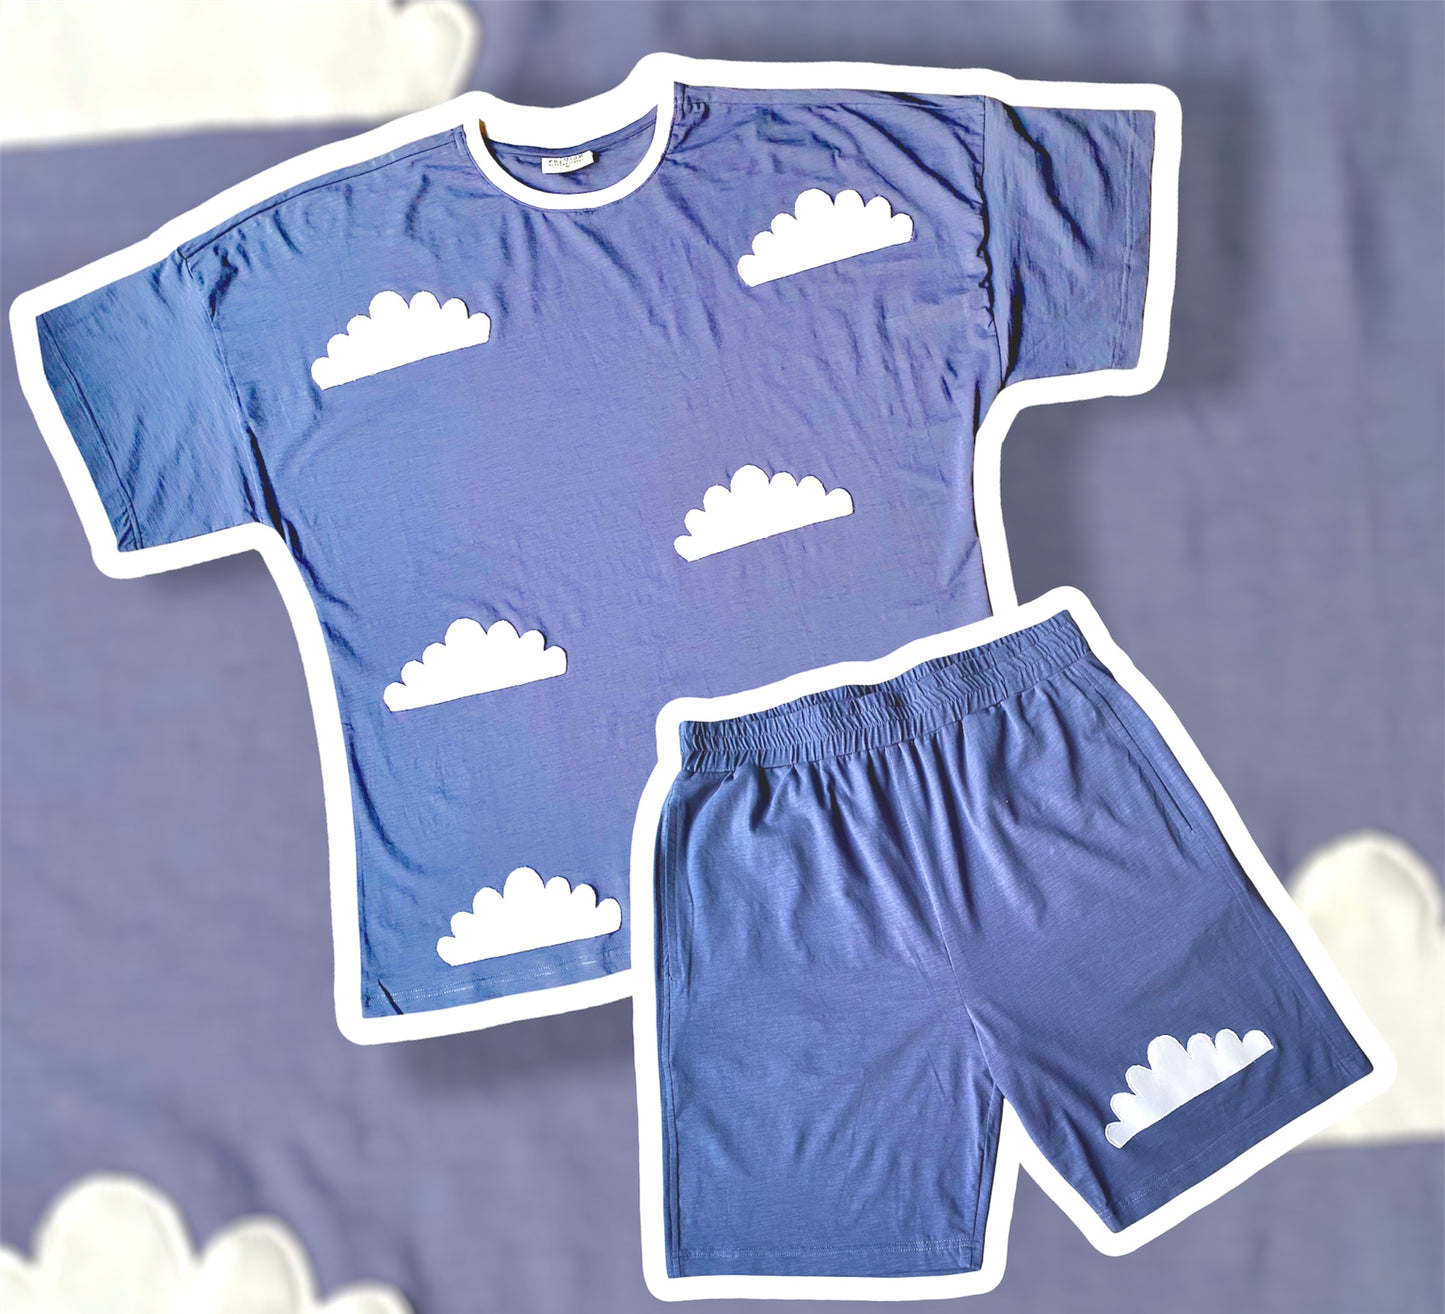 Cloudy Co-ord Set blue